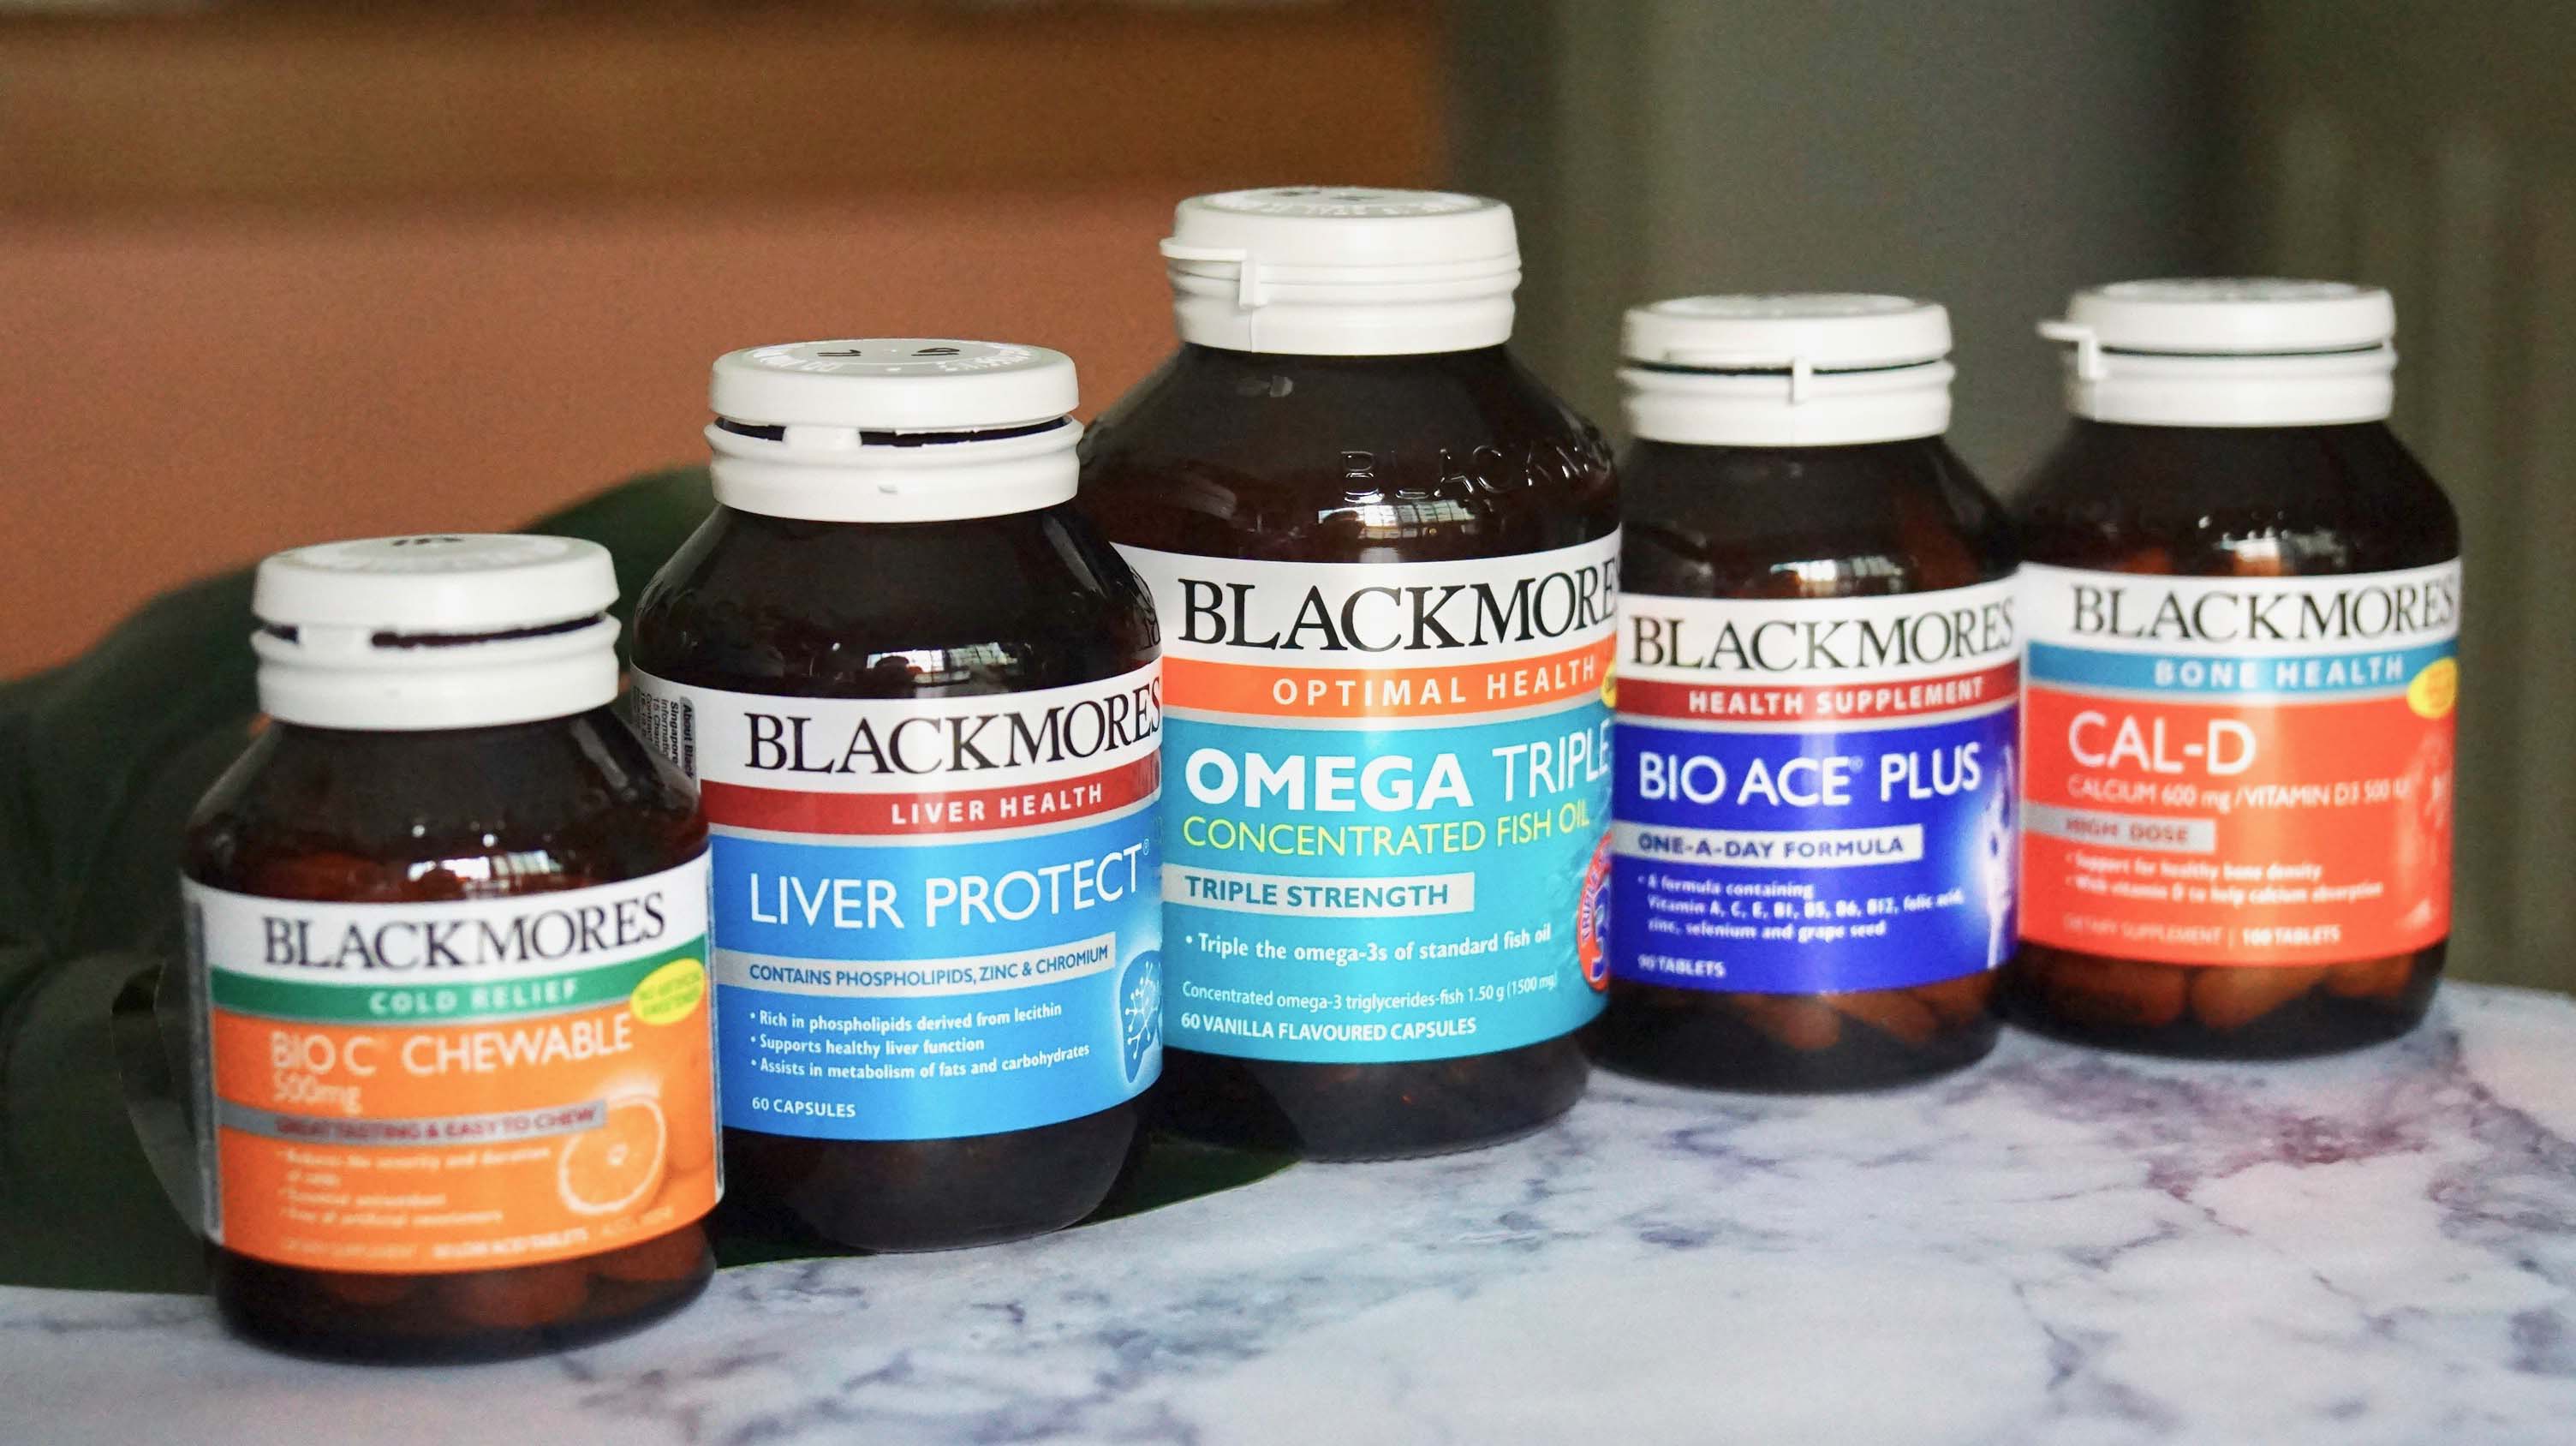 Blackmores Supplements (Katherine Sng photo)